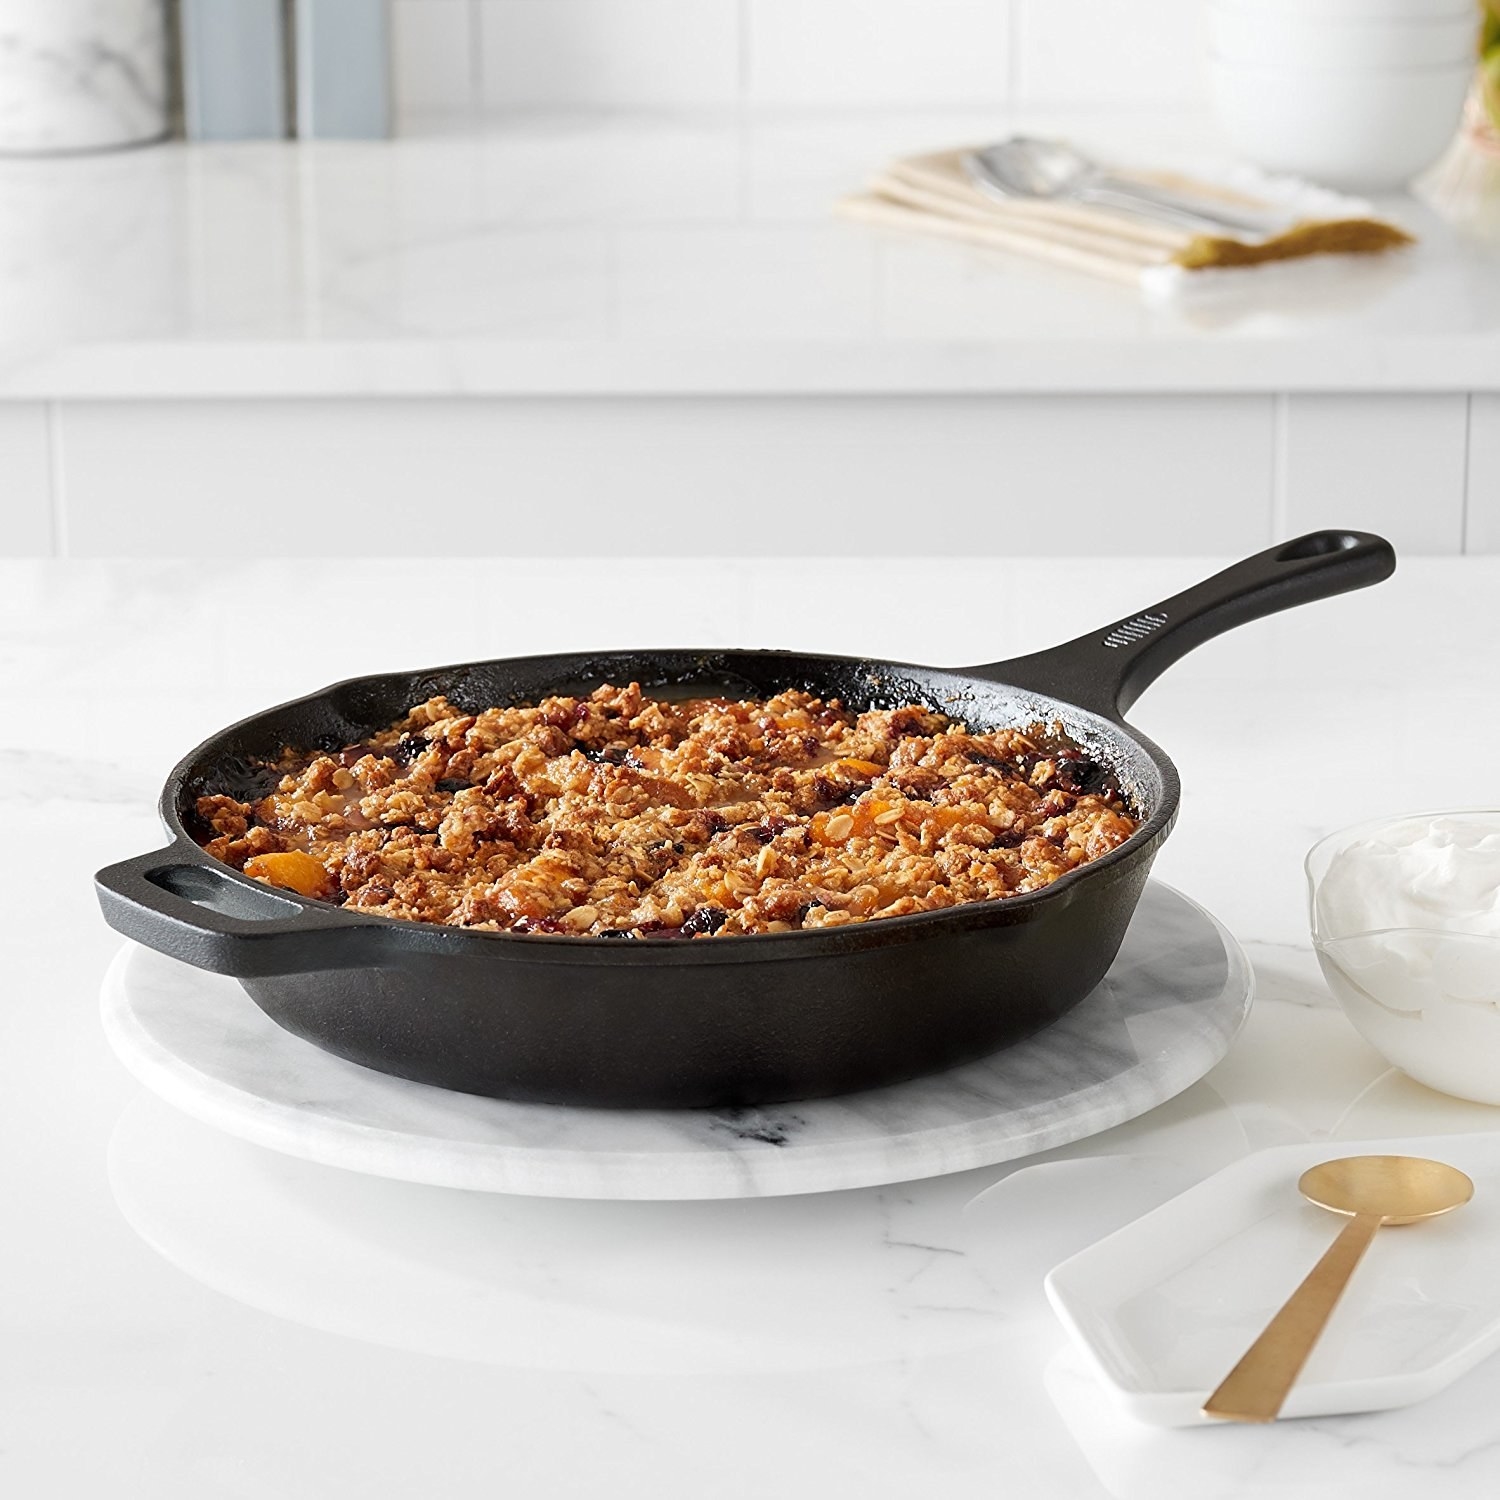 Product shot of a cast iron skillet filled with a casserole